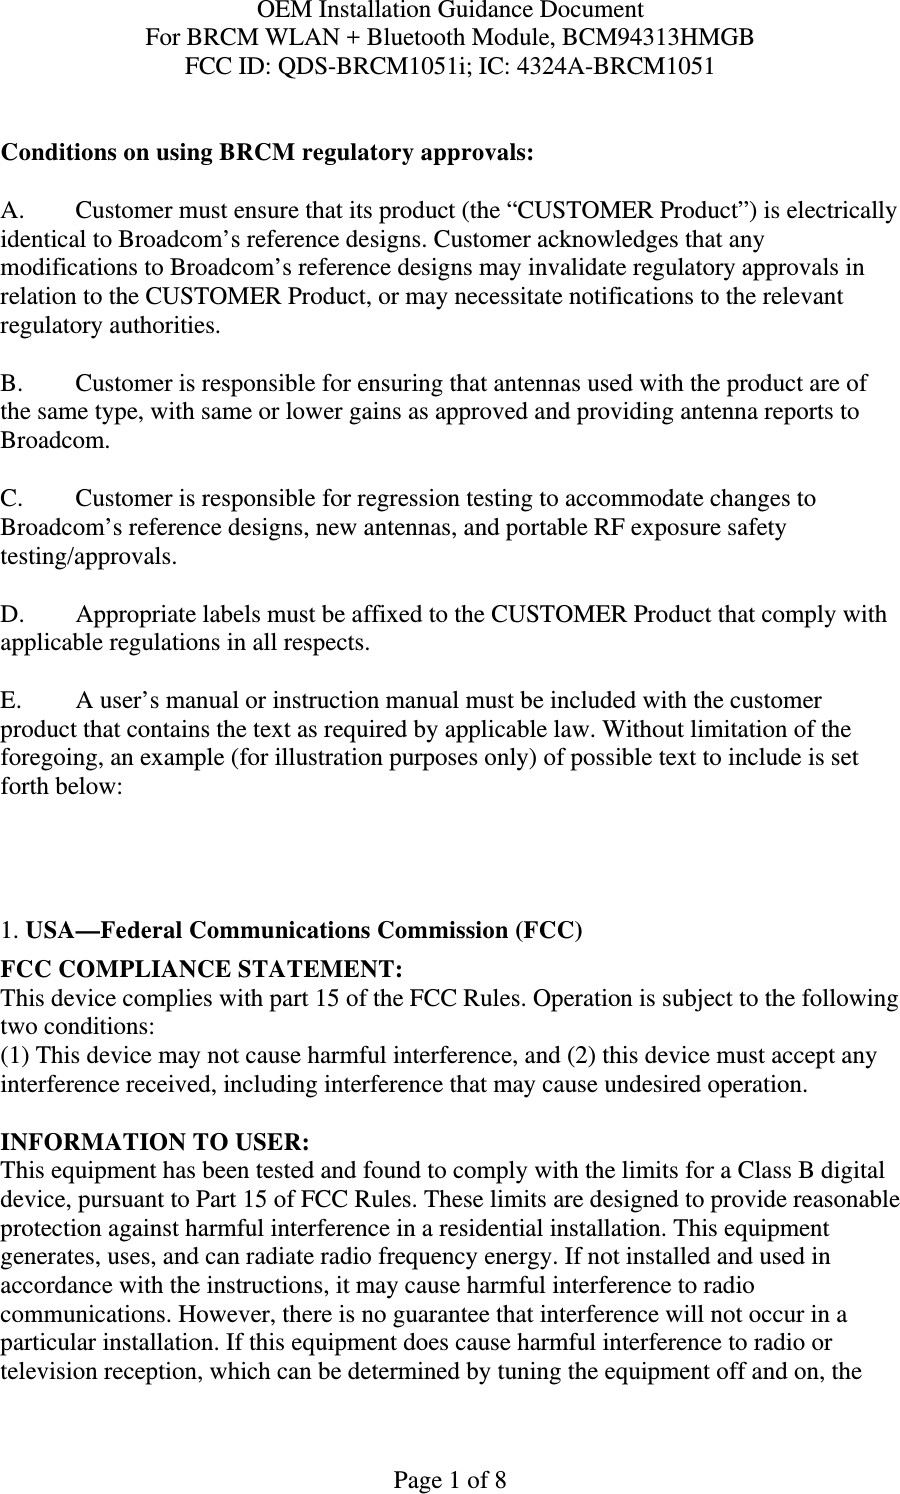 OEM Installation Guidance Document For BRCM WLAN + Bluetooth Module, BCM94313HMGB FCC ID: QDS-BRCM1051i; IC: 4324A-BRCM1051  Page 1 of 8  Conditions on using BRCM regulatory approvals:   A.  Customer must ensure that its product (the “CUSTOMER Product”) is electrically identical to Broadcom’s reference designs. Customer acknowledges that any modifications to Broadcom’s reference designs may invalidate regulatory approvals in relation to the CUSTOMER Product, or may necessitate notifications to the relevant regulatory authorities.  B.   Customer is responsible for ensuring that antennas used with the product are of the same type, with same or lower gains as approved and providing antenna reports to Broadcom.  C.   Customer is responsible for regression testing to accommodate changes to Broadcom’s reference designs, new antennas, and portable RF exposure safety testing/approvals.  D.  Appropriate labels must be affixed to the CUSTOMER Product that comply with applicable regulations in all respects.    E.  A user’s manual or instruction manual must be included with the customer product that contains the text as required by applicable law. Without limitation of the foregoing, an example (for illustration purposes only) of possible text to include is set forth below:       1. USA—Federal Communications Commission (FCC) FCC COMPLIANCE STATEMENT: This device complies with part 15 of the FCC Rules. Operation is subject to the following two conditions: (1) This device may not cause harmful interference, and (2) this device must accept any interference received, including interference that may cause undesired operation.  INFORMATION TO USER: This equipment has been tested and found to comply with the limits for a Class B digital device, pursuant to Part 15 of FCC Rules. These limits are designed to provide reasonable protection against harmful interference in a residential installation. This equipment generates, uses, and can radiate radio frequency energy. If not installed and used in accordance with the instructions, it may cause harmful interference to radio communications. However, there is no guarantee that interference will not occur in a particular installation. If this equipment does cause harmful interference to radio or television reception, which can be determined by tuning the equipment off and on, the 